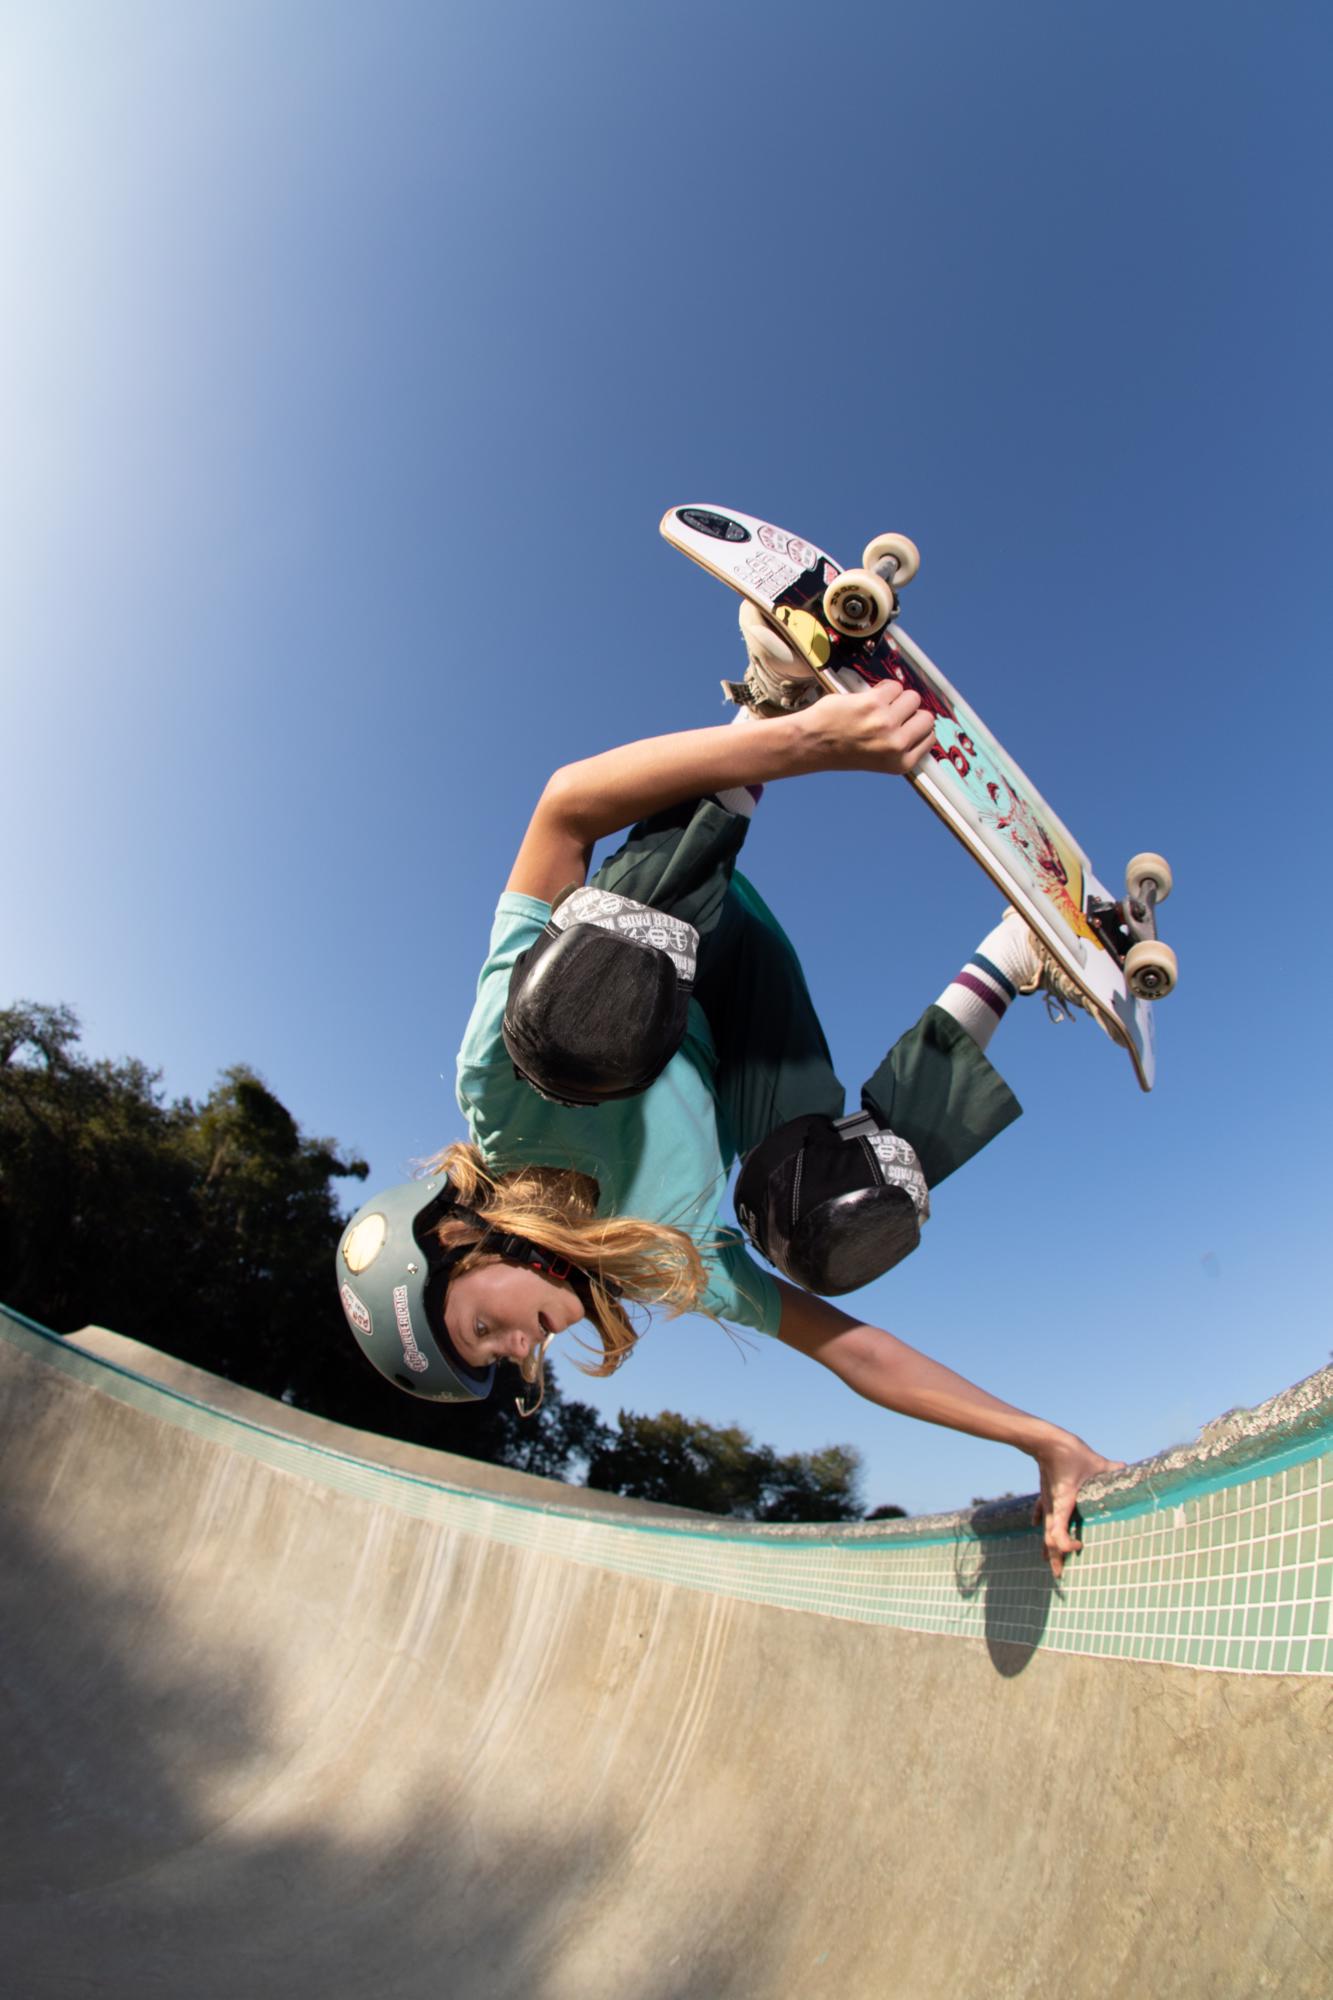 Photo of team rider Harlow Johnsey doing a hand stand while skateboarding